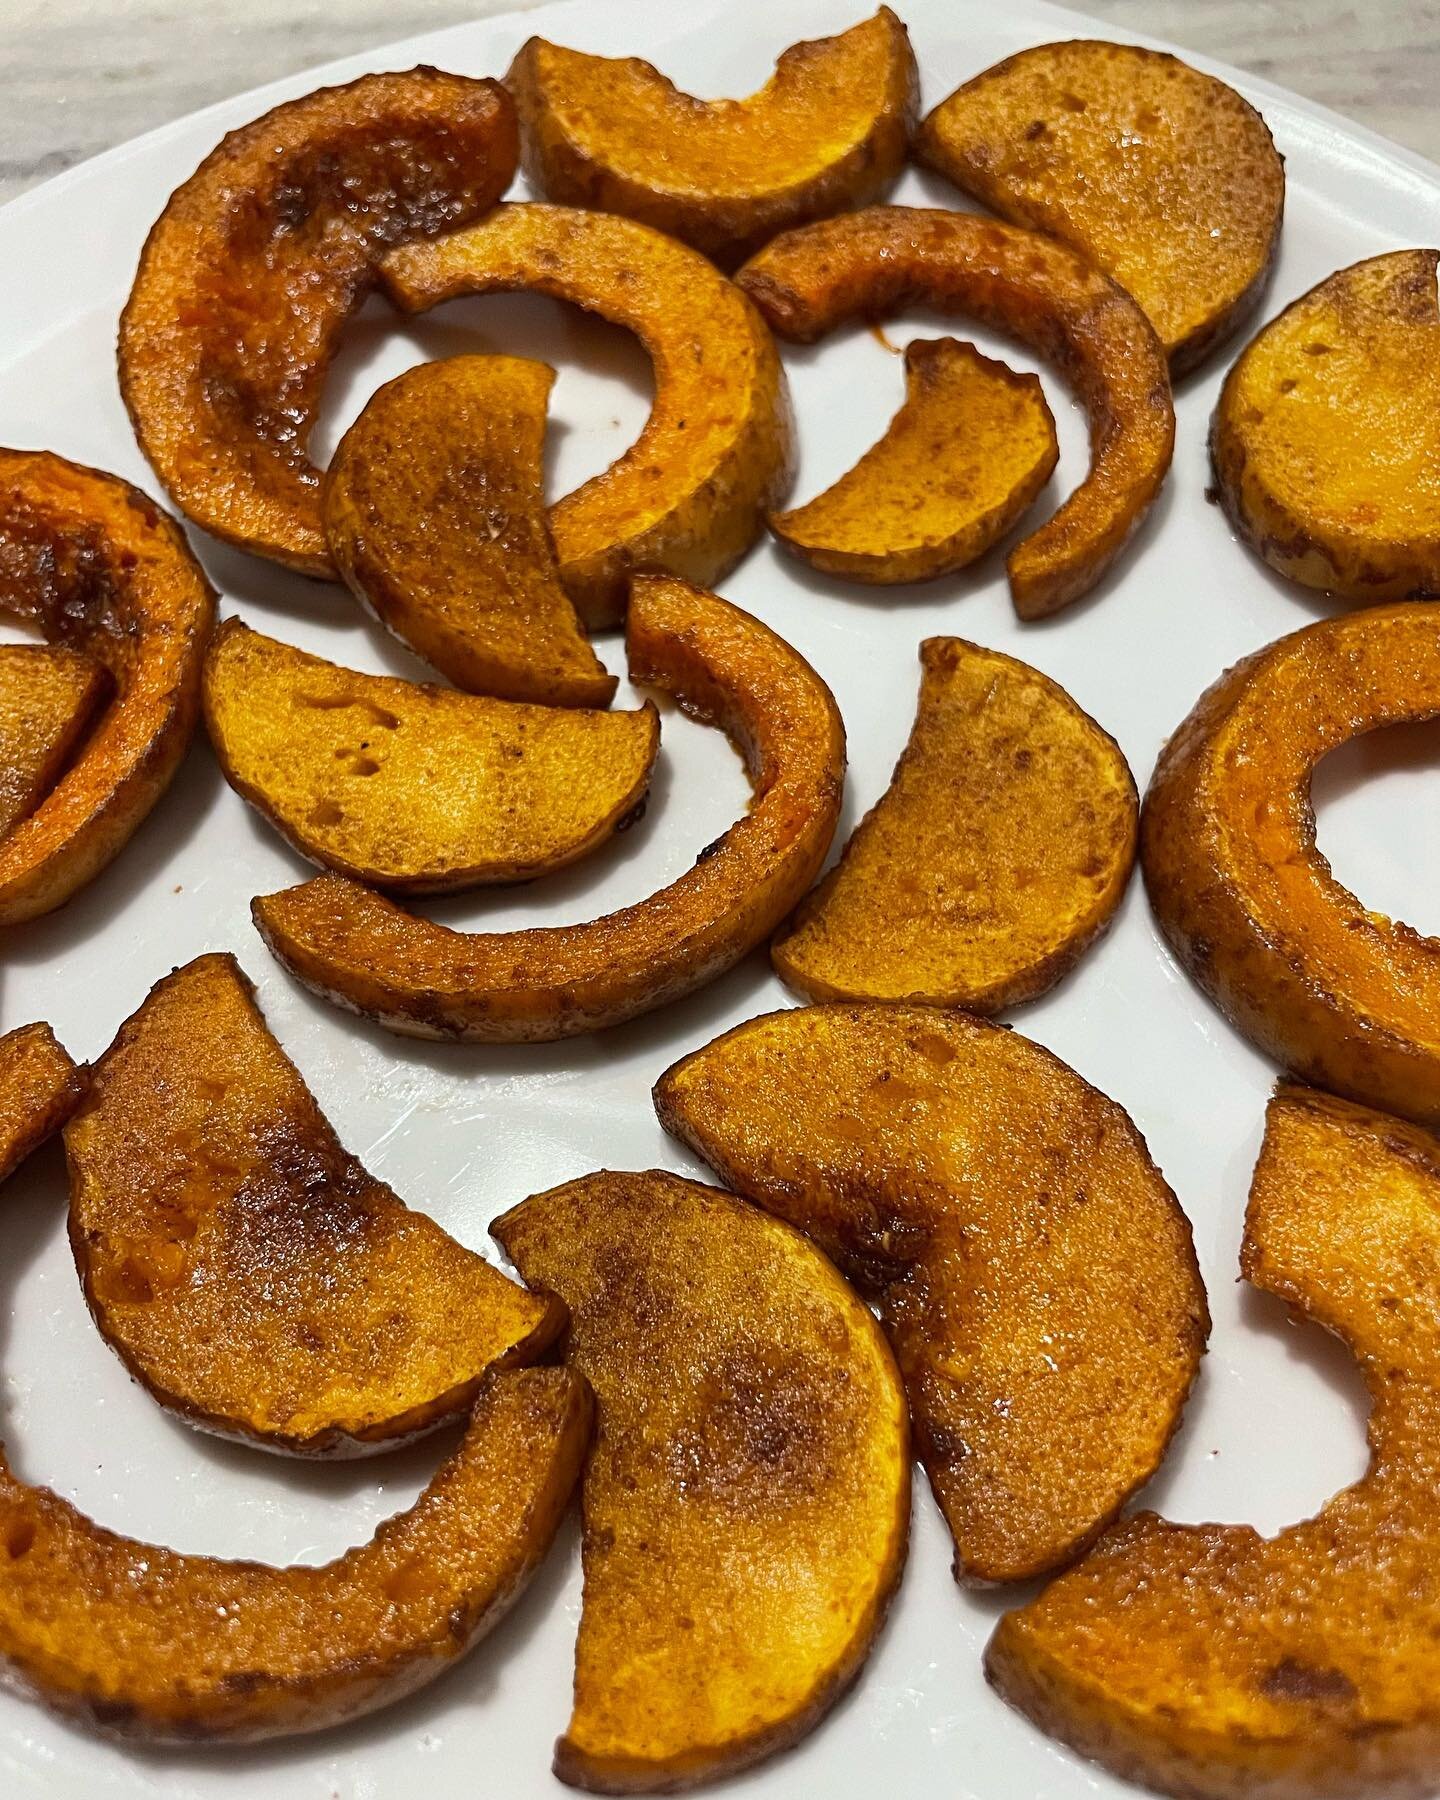 Have you tried honeynut squash? It&rsquo;s a cross between butternut and buttercup squash! It&rsquo;s about half the size and sweeter than butternut squash! We&rsquo;ve added this maple spiced honeynut squash recipe to the blog to spice up your Thank